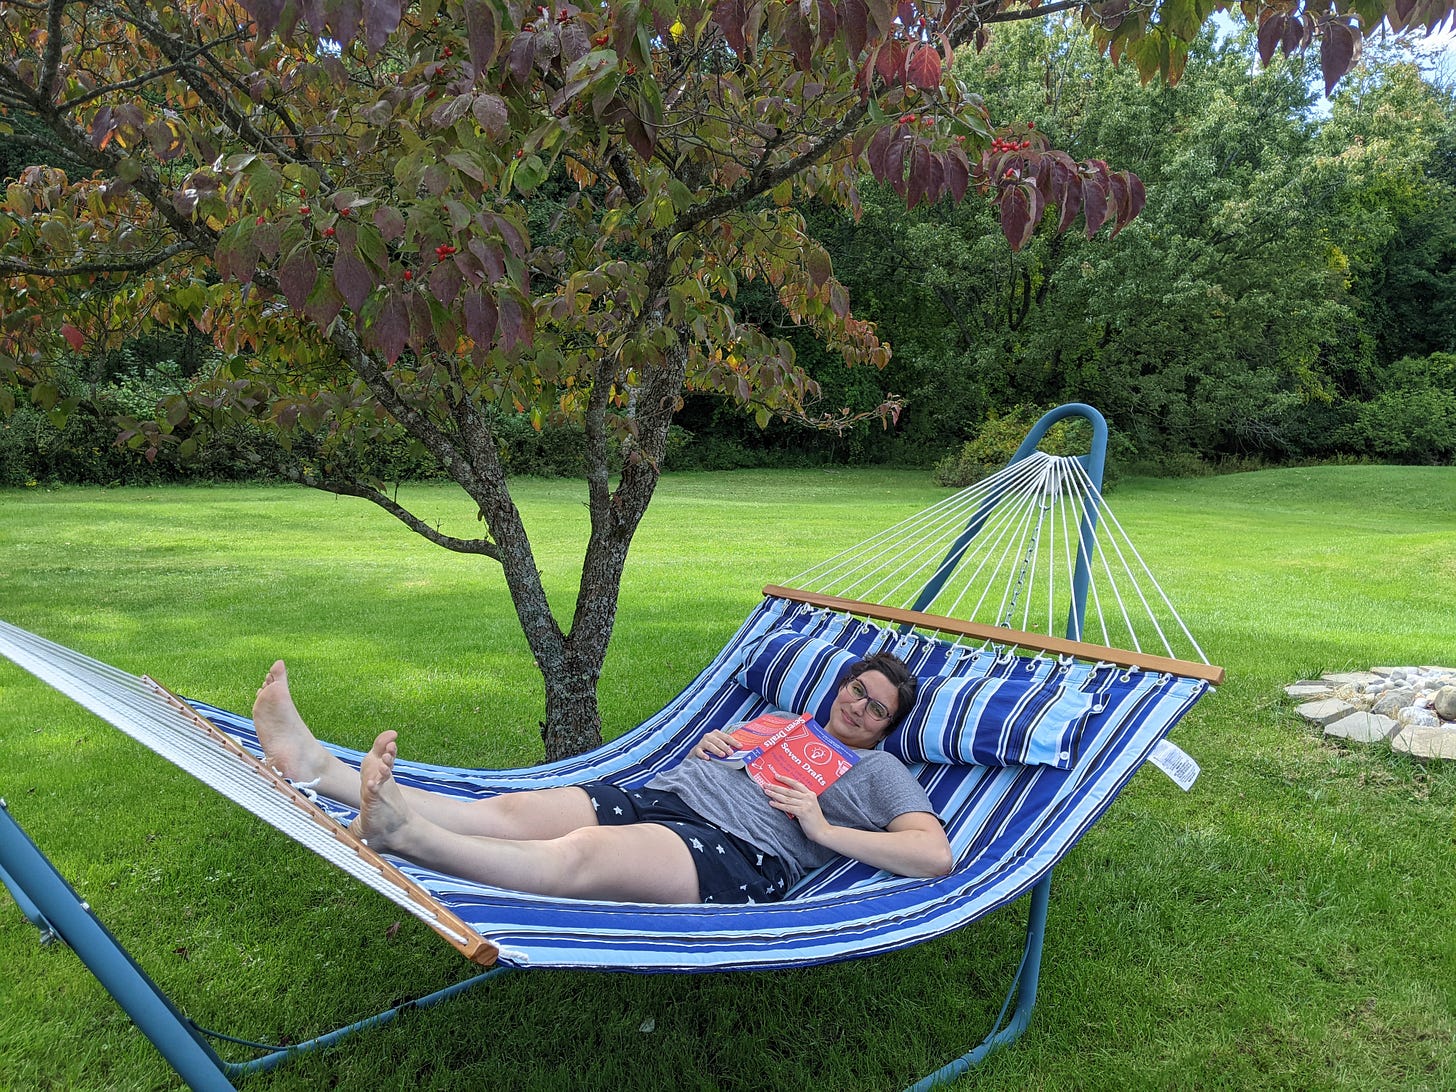 Photo of me lying on the hammock in the backyard. It's striped various shades of blue and sitting under a small tree.